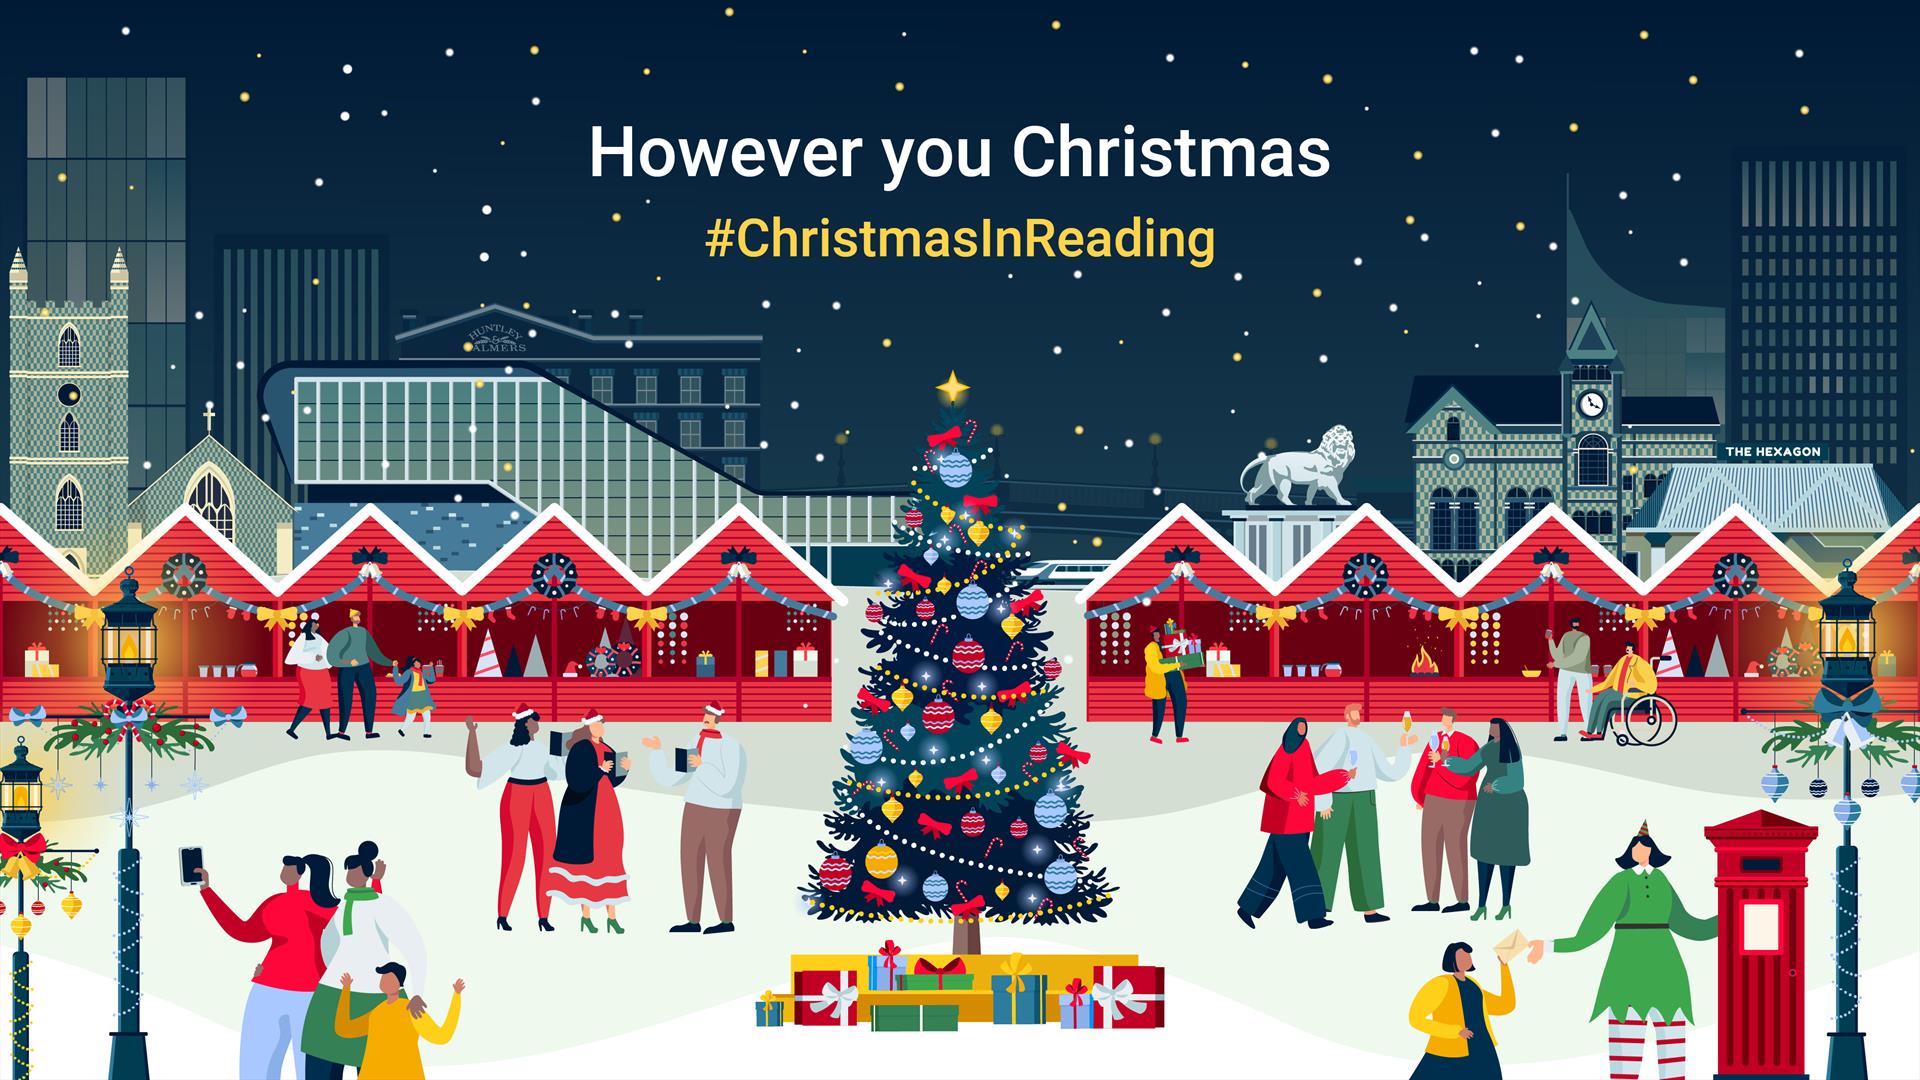 Illustrated scene showing people celebrating Christmas in Reading